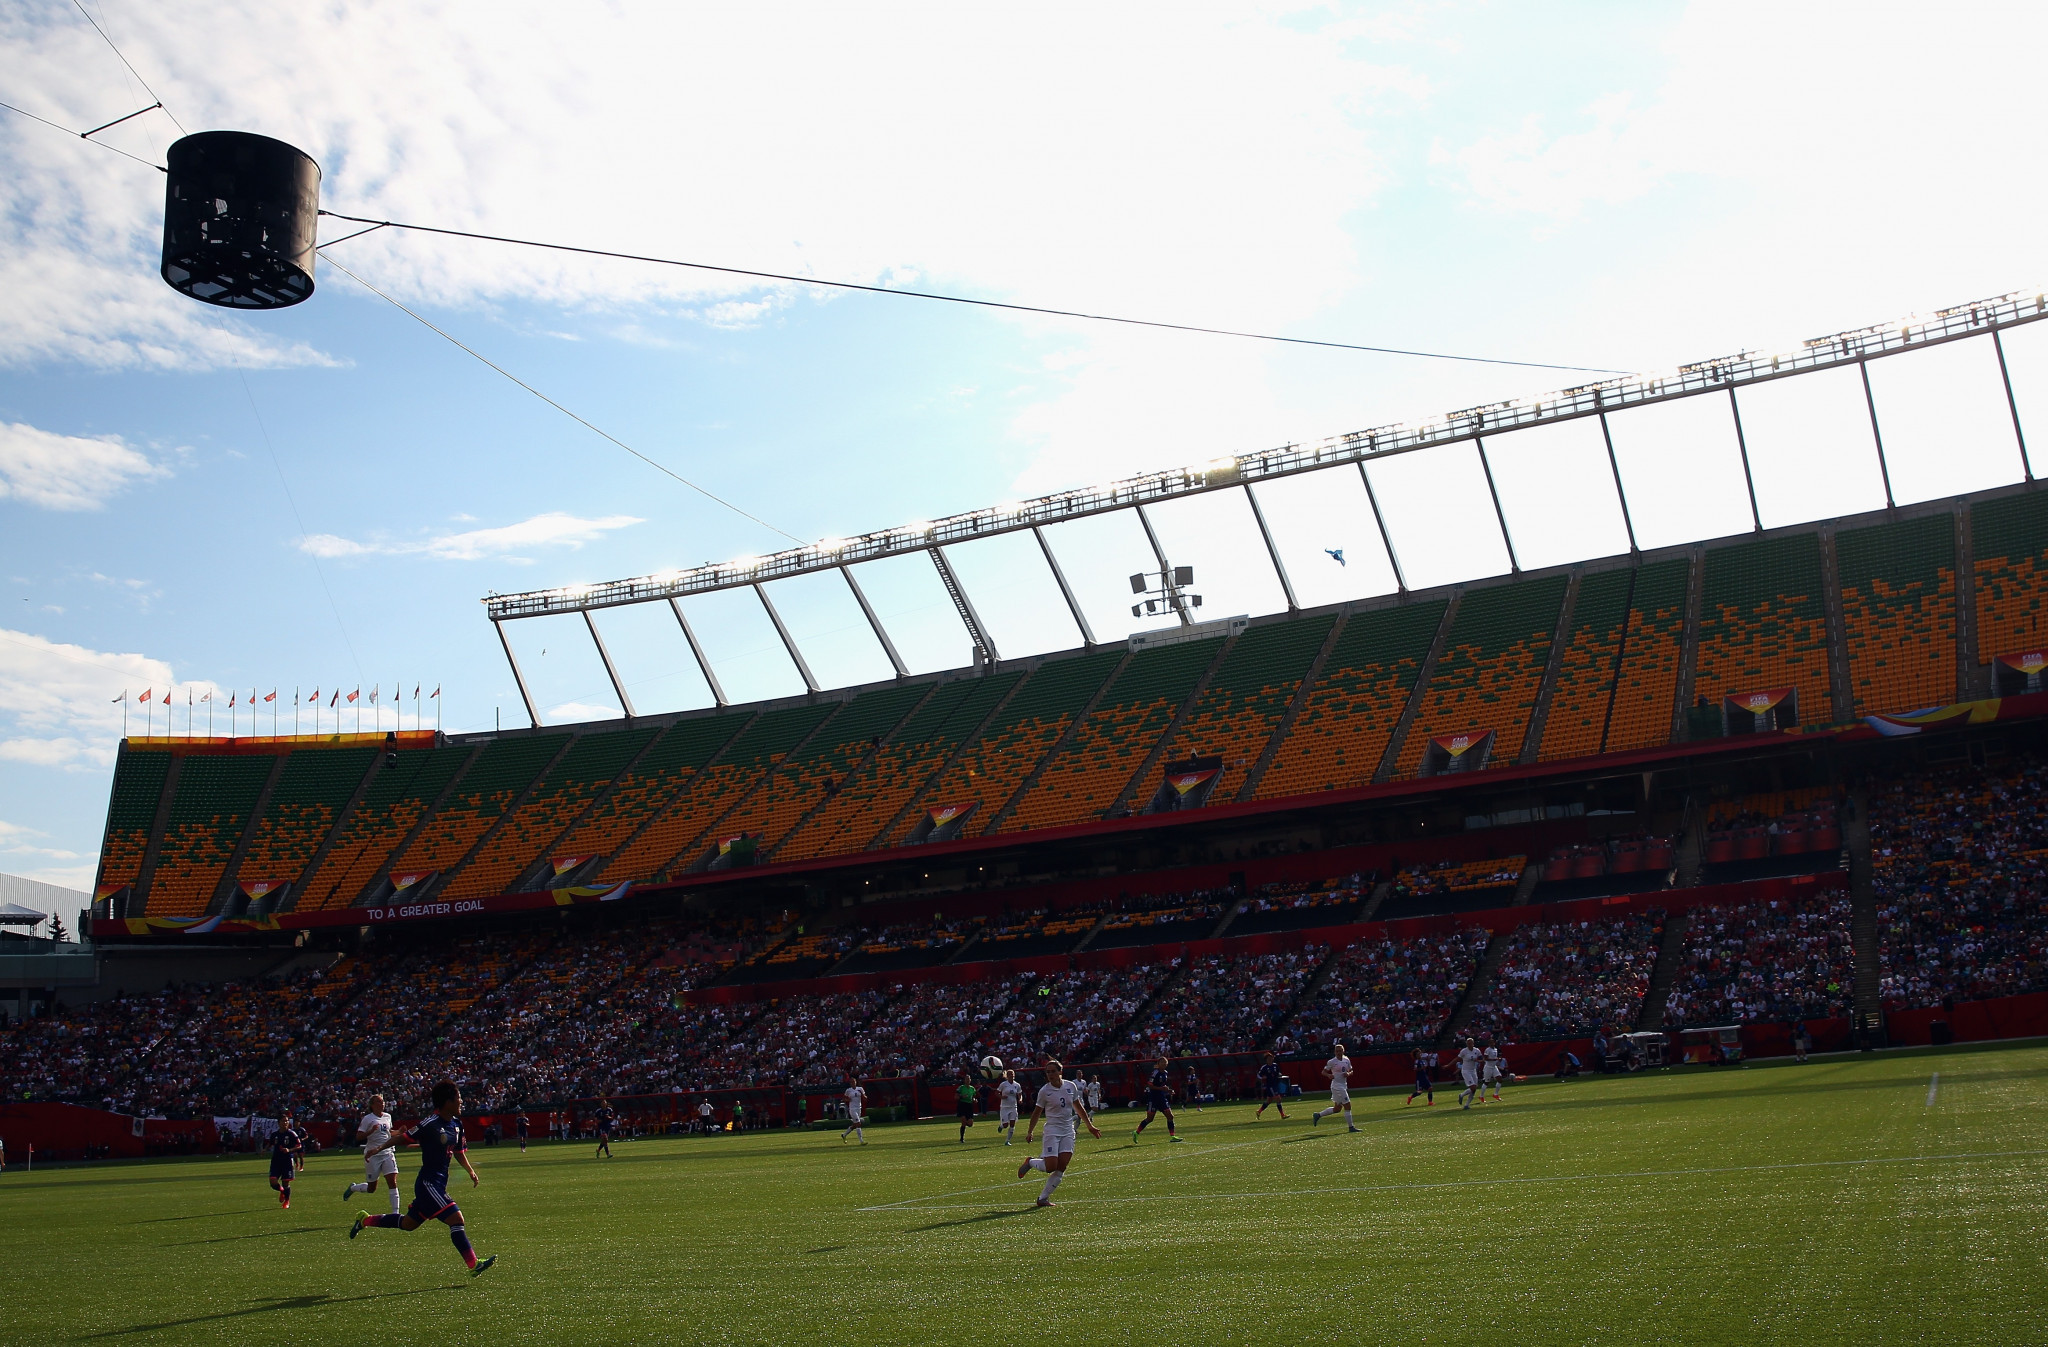 The Edmonton Commonwealth Stadium could benefit from a revamp should Alberta win the bid but there are concerns over the financial impact ©Getty Images